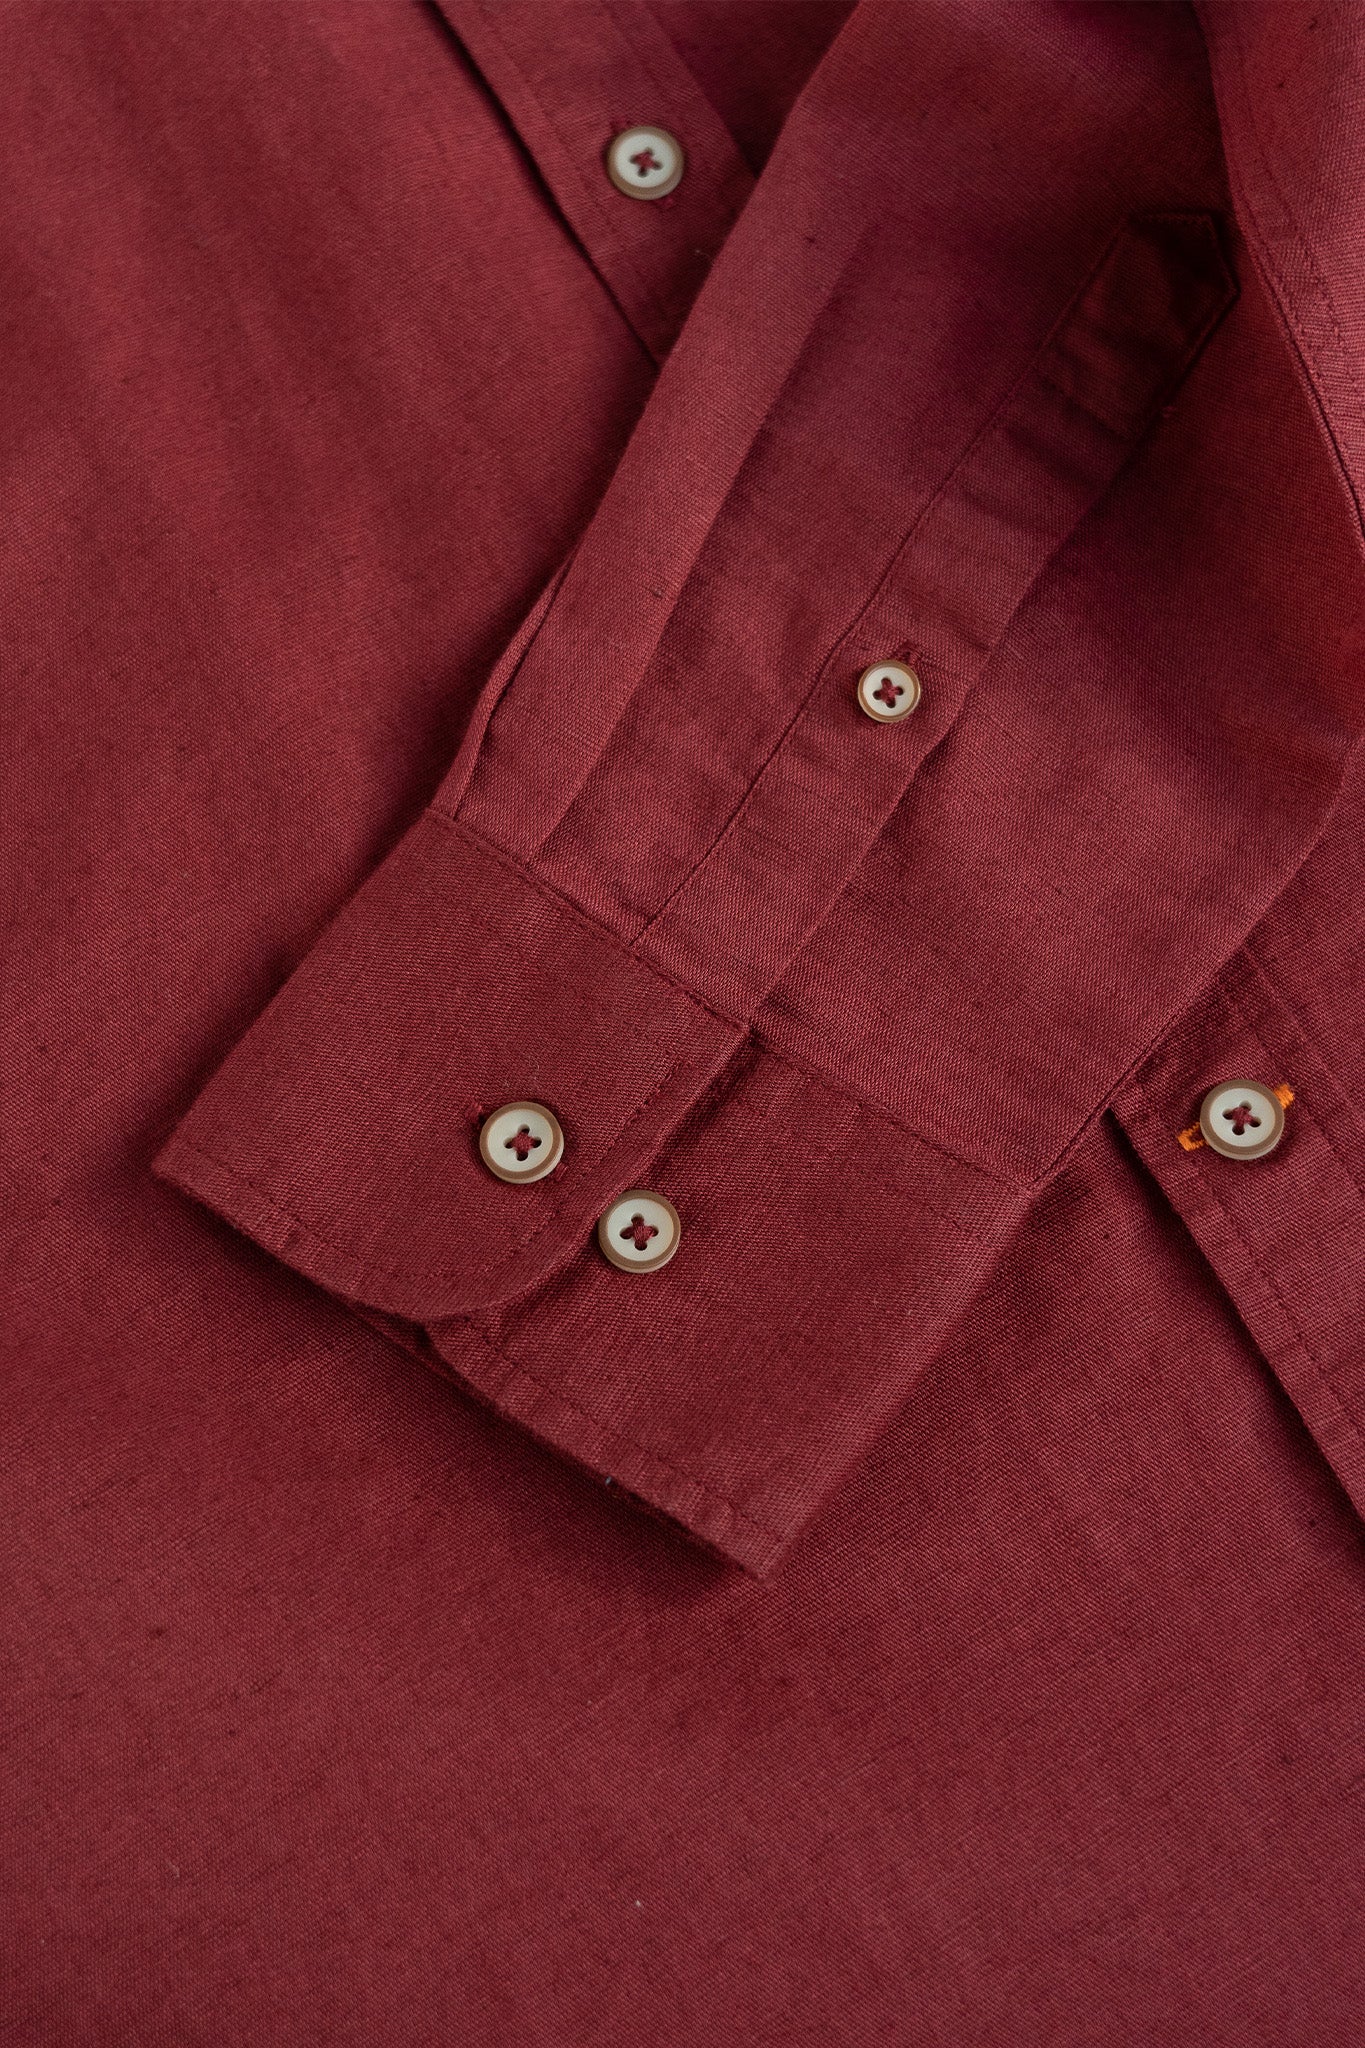 Bare Brown Mandarin Collar Cotton Linen Shirt, Slim Fit with Full Sleeves - Maroon